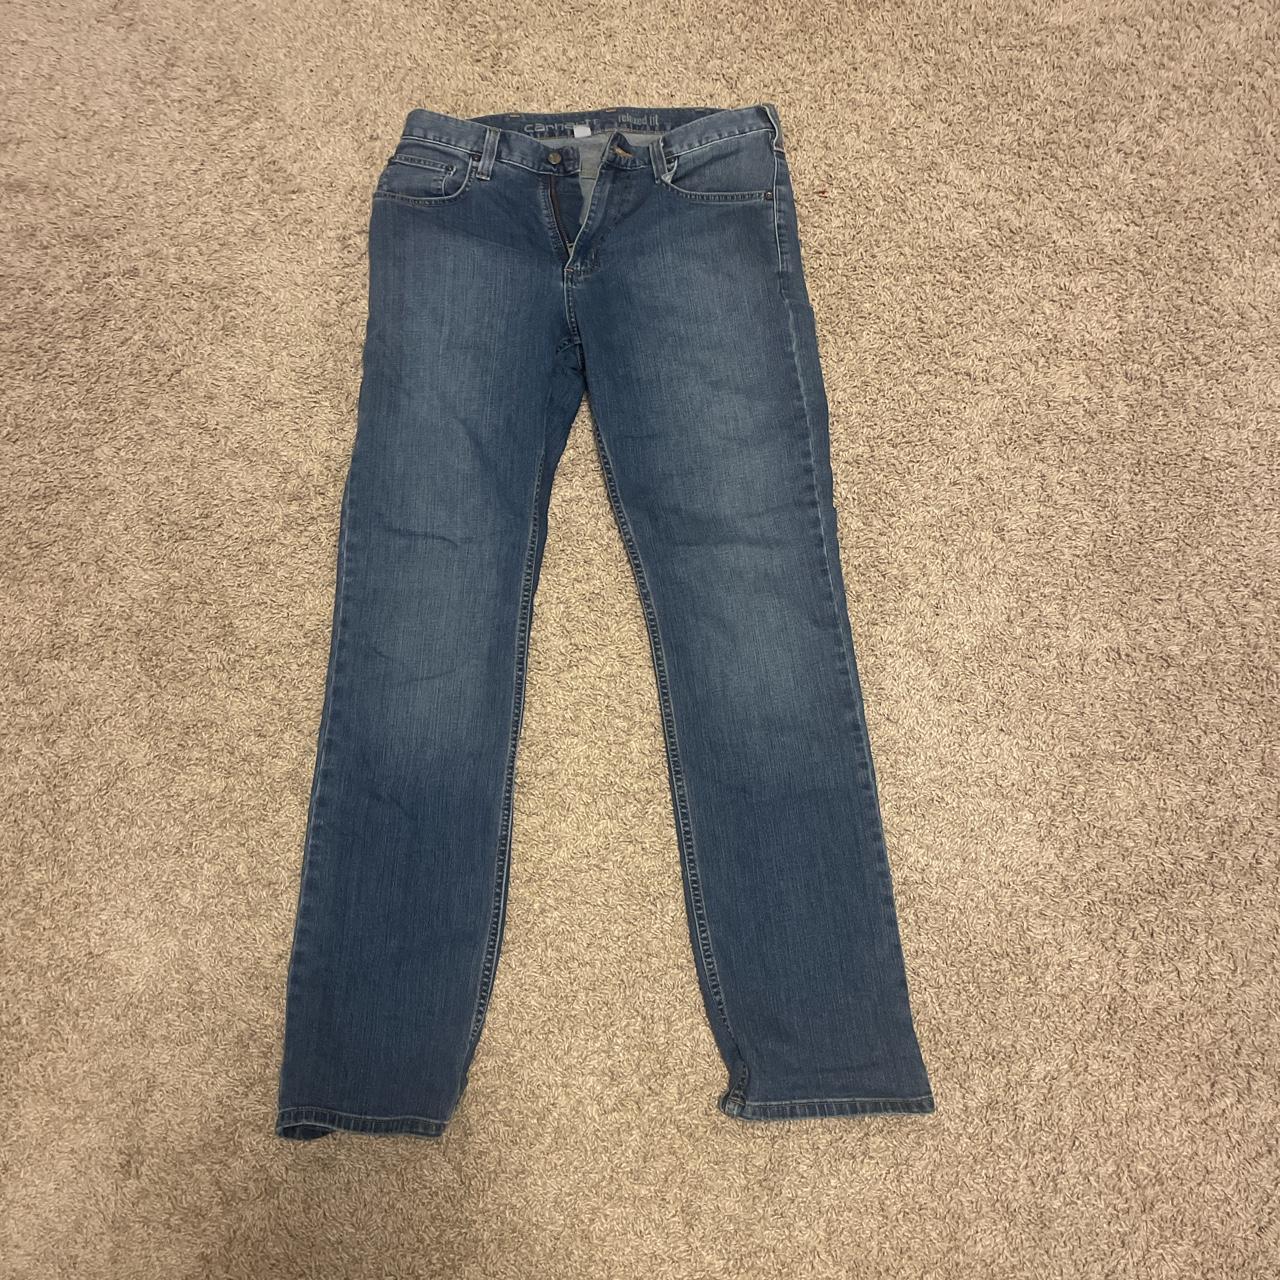 Carhart rugged flex relaxed fit jeans. Straight fit.... - Depop